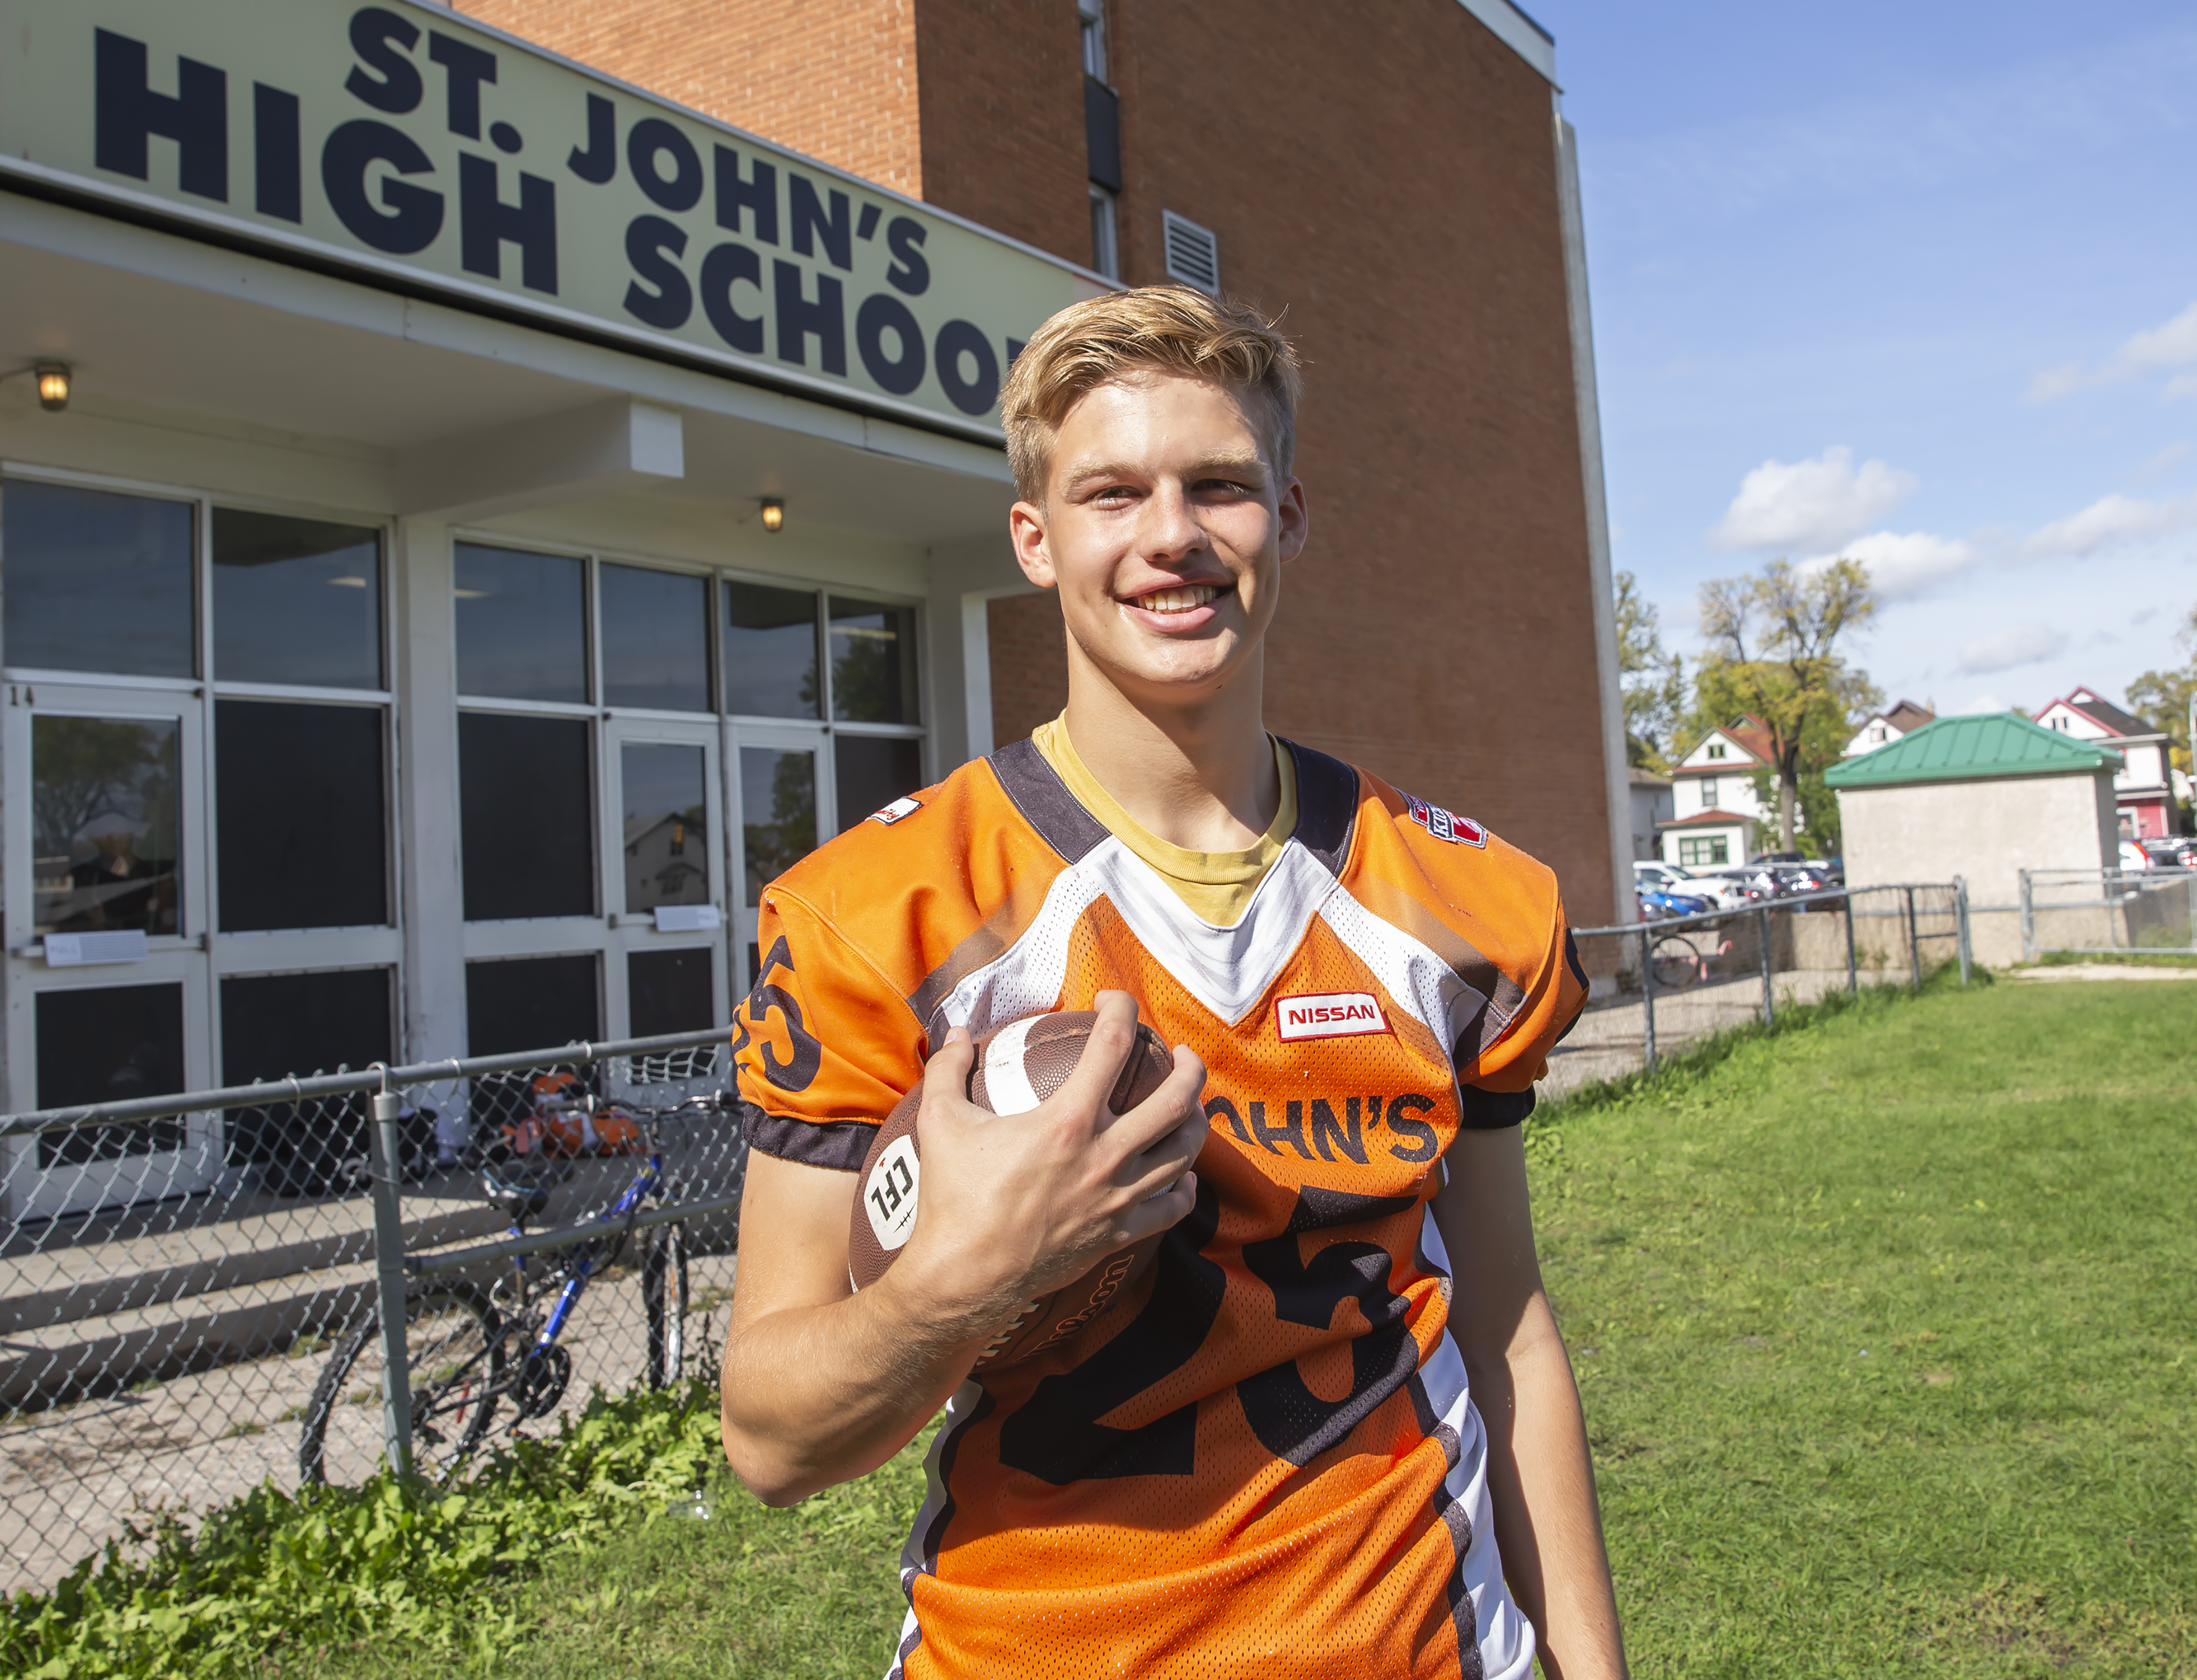 ST JOHNS ATHLETE OF THE YEAR ASHER WOOD.jpg